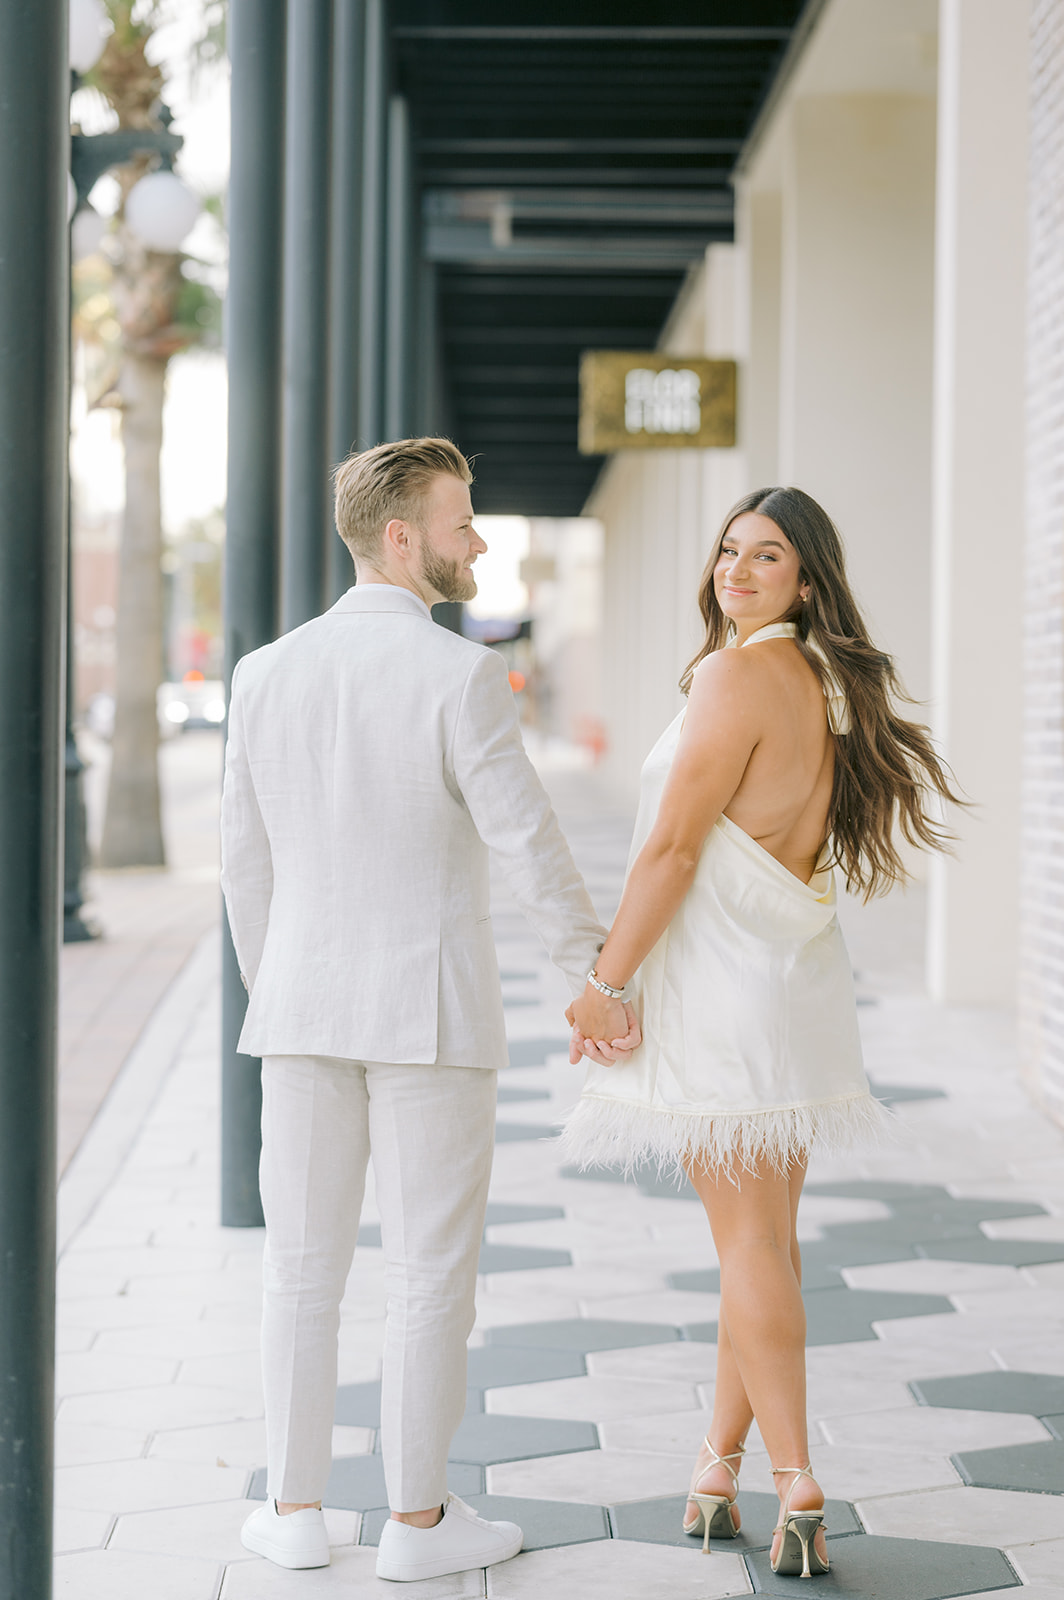 "Exquisite Tampa engagement photography at Hotel Haya"
